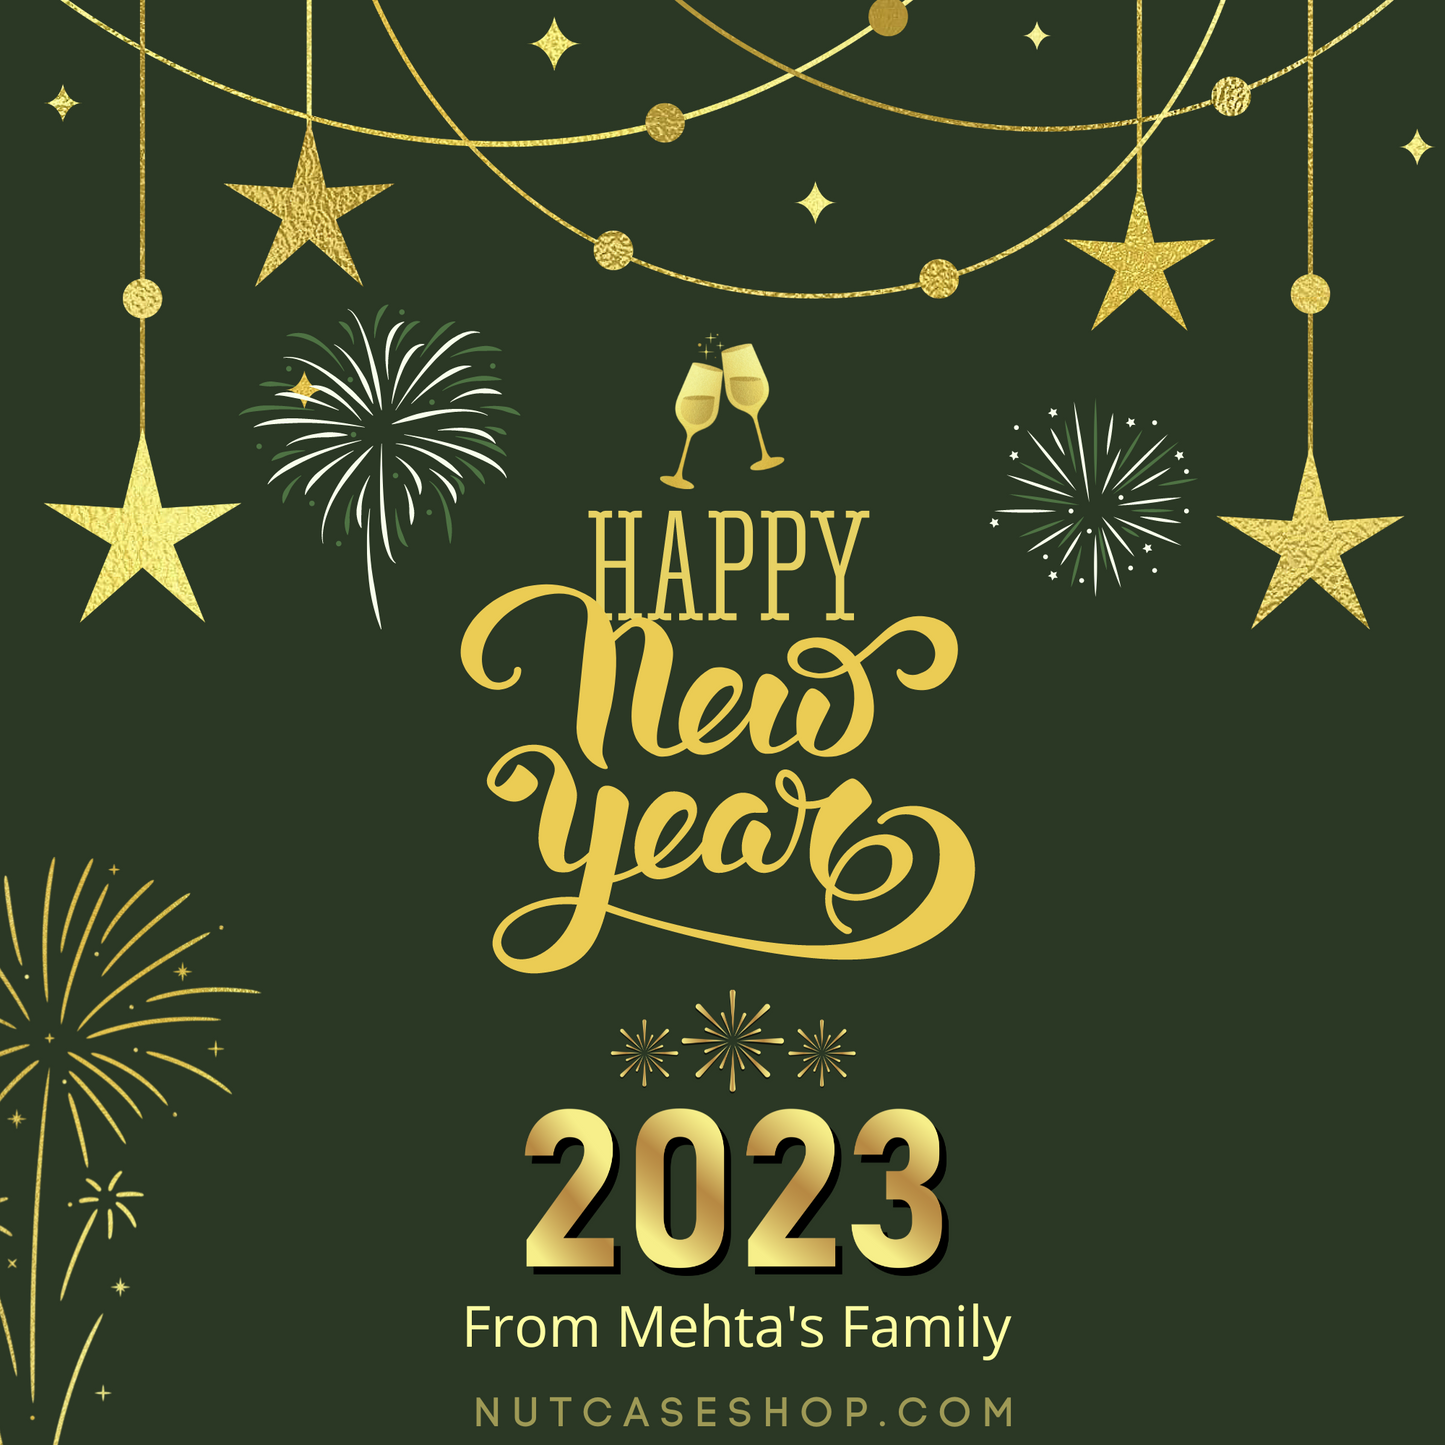 New Year - Personalized Happy New Year Greetings